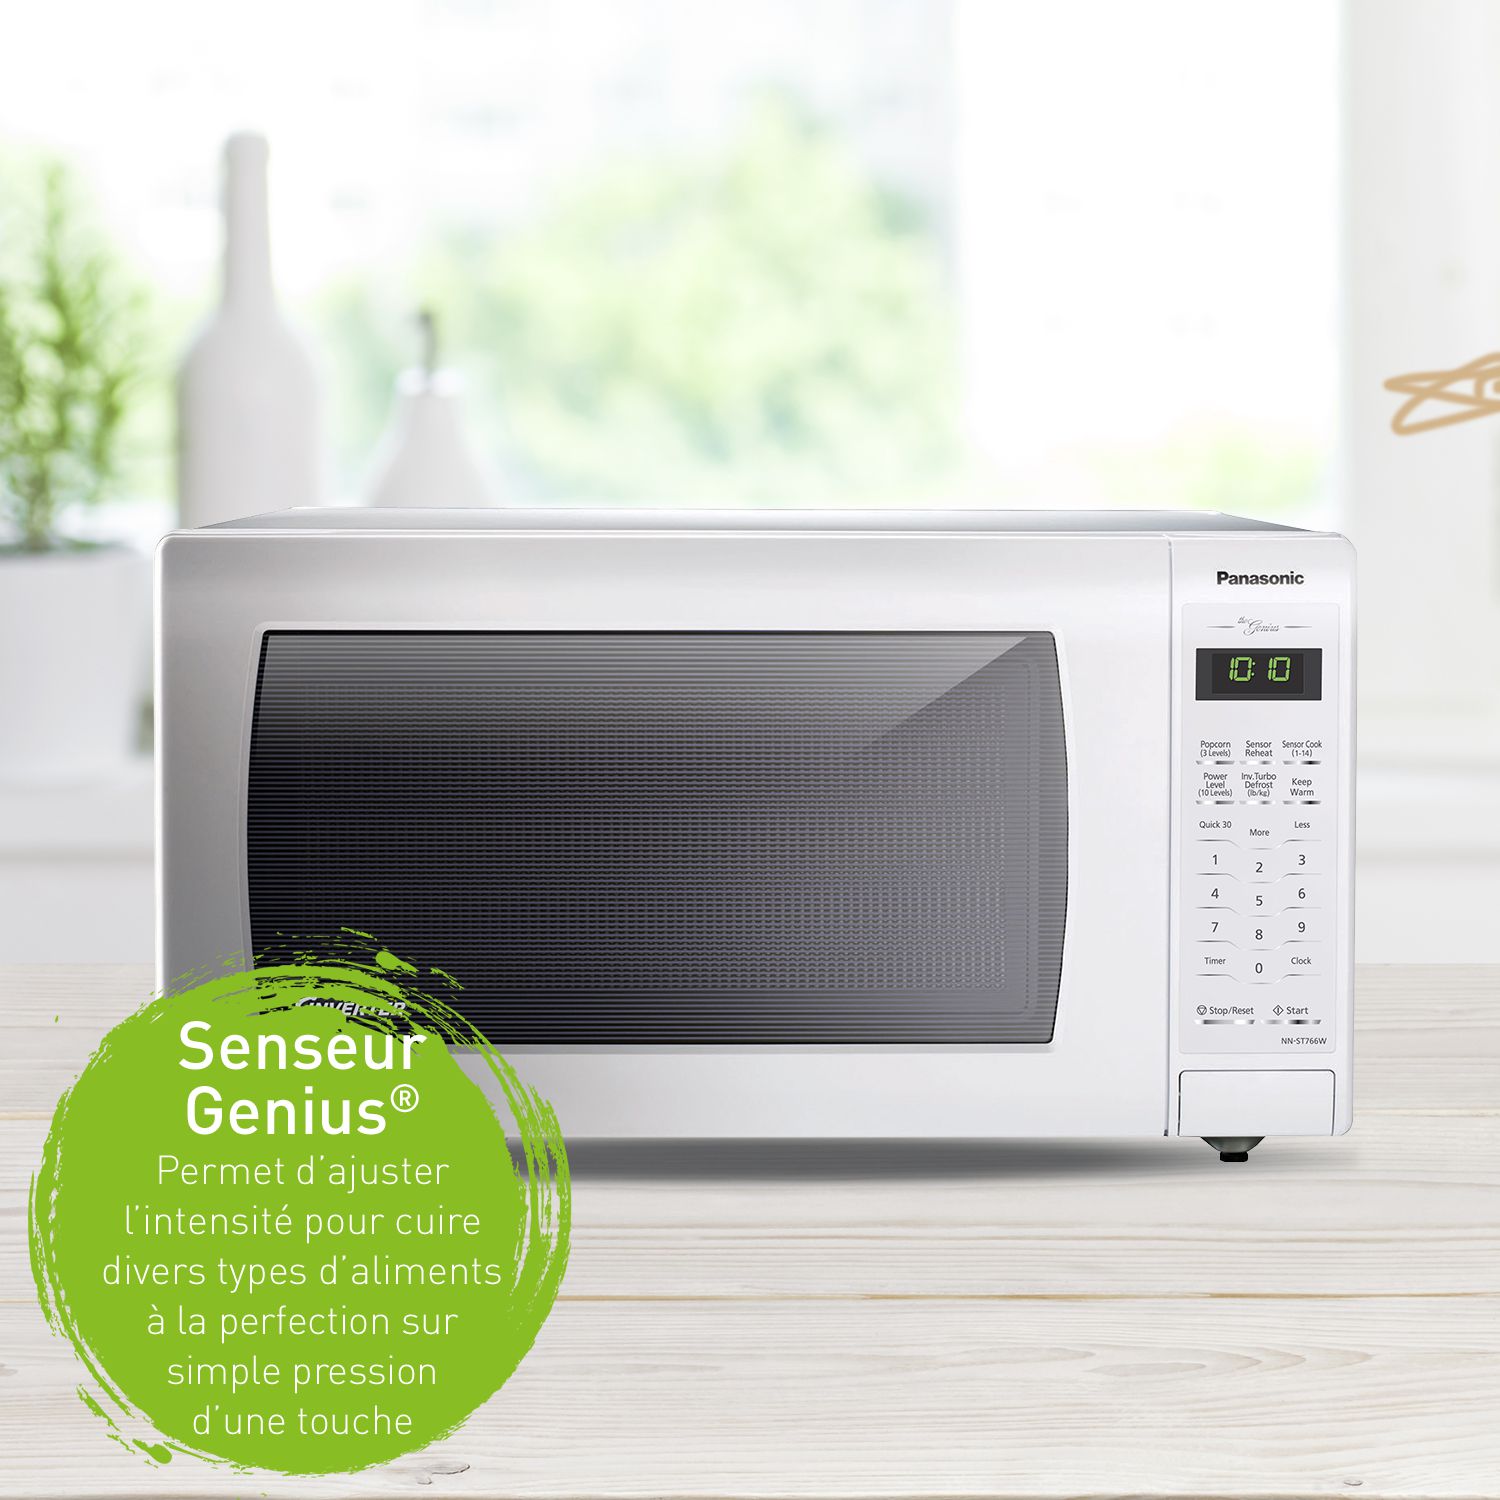 Panasonic 2.2 cu.ft. with Genius and Inverter Technology 